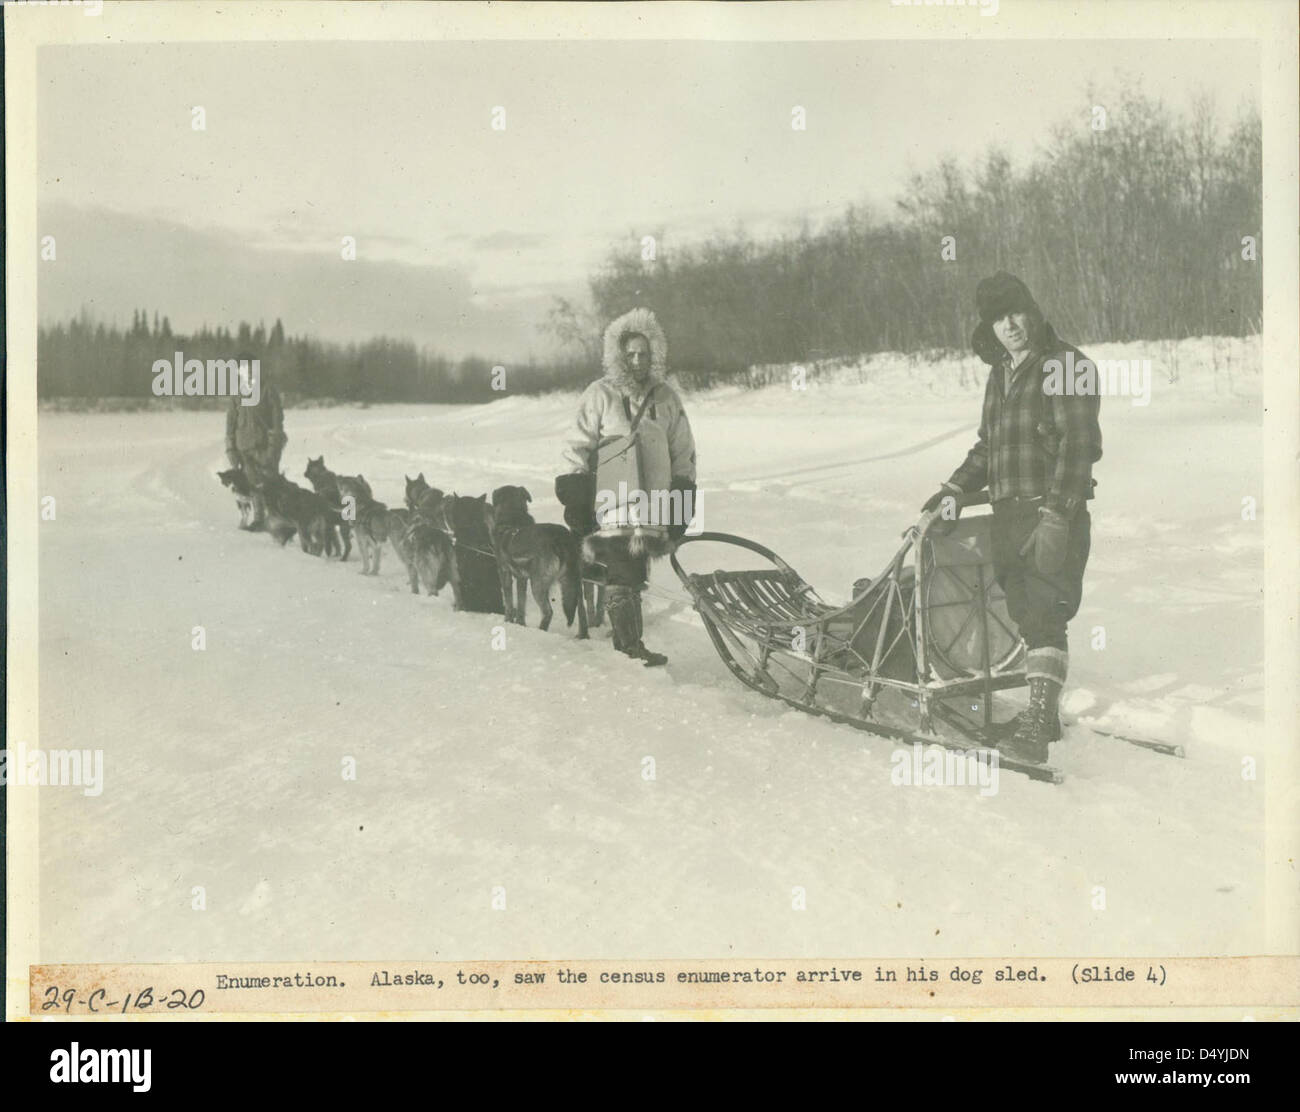 Enumeration, Alaska Too Saw the Census Enumerator Arrive in His Dog Sled, 1940 - 1941 Stock Photo